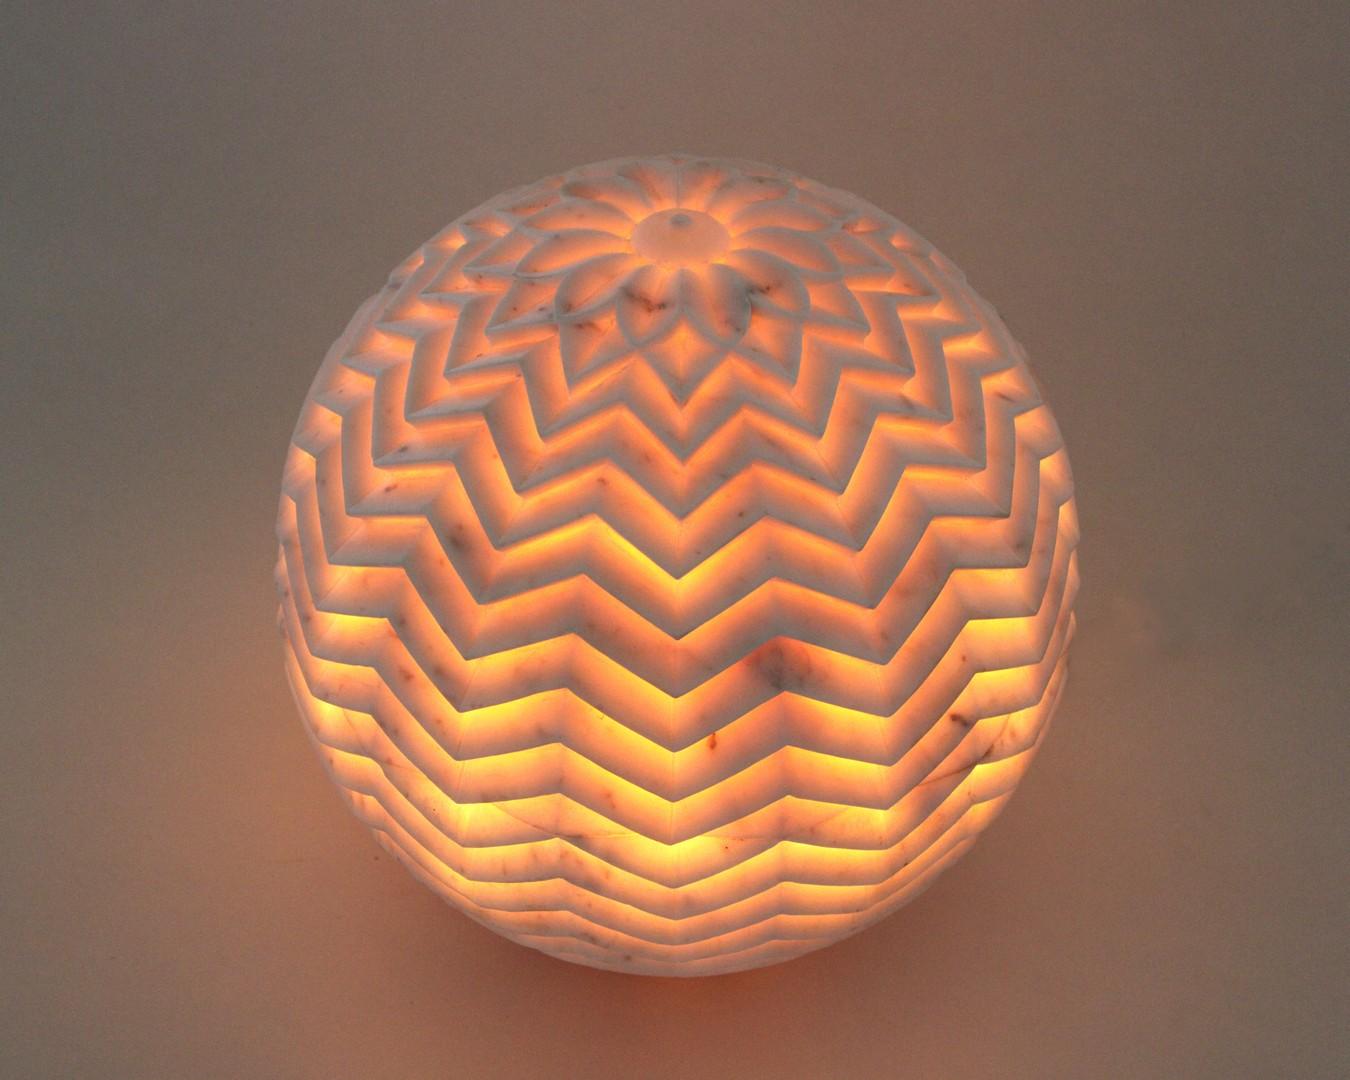 Inspired by the leheriya (similar to chevron) pattern she observed in her travels in rural Rajasthan, Stephanie Odegard designed this beautiful floor/outdoor lighting fixture. Solid pieces of marble are first turned into hemispherical halves and